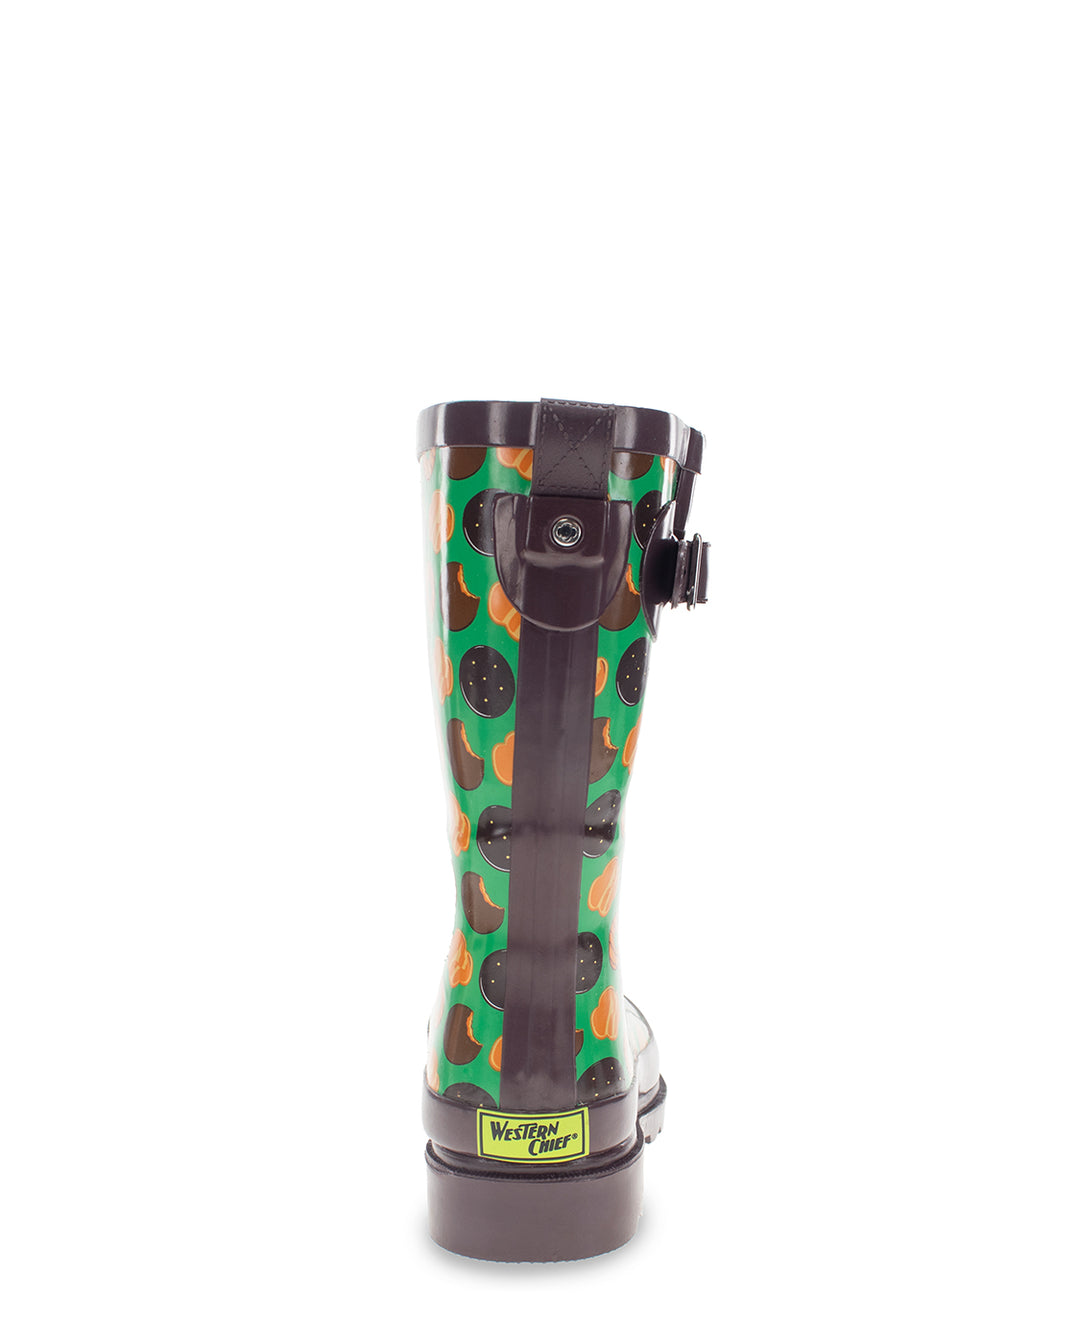 Lucky Horseshoes Printed Rubber Mid Rain Boot